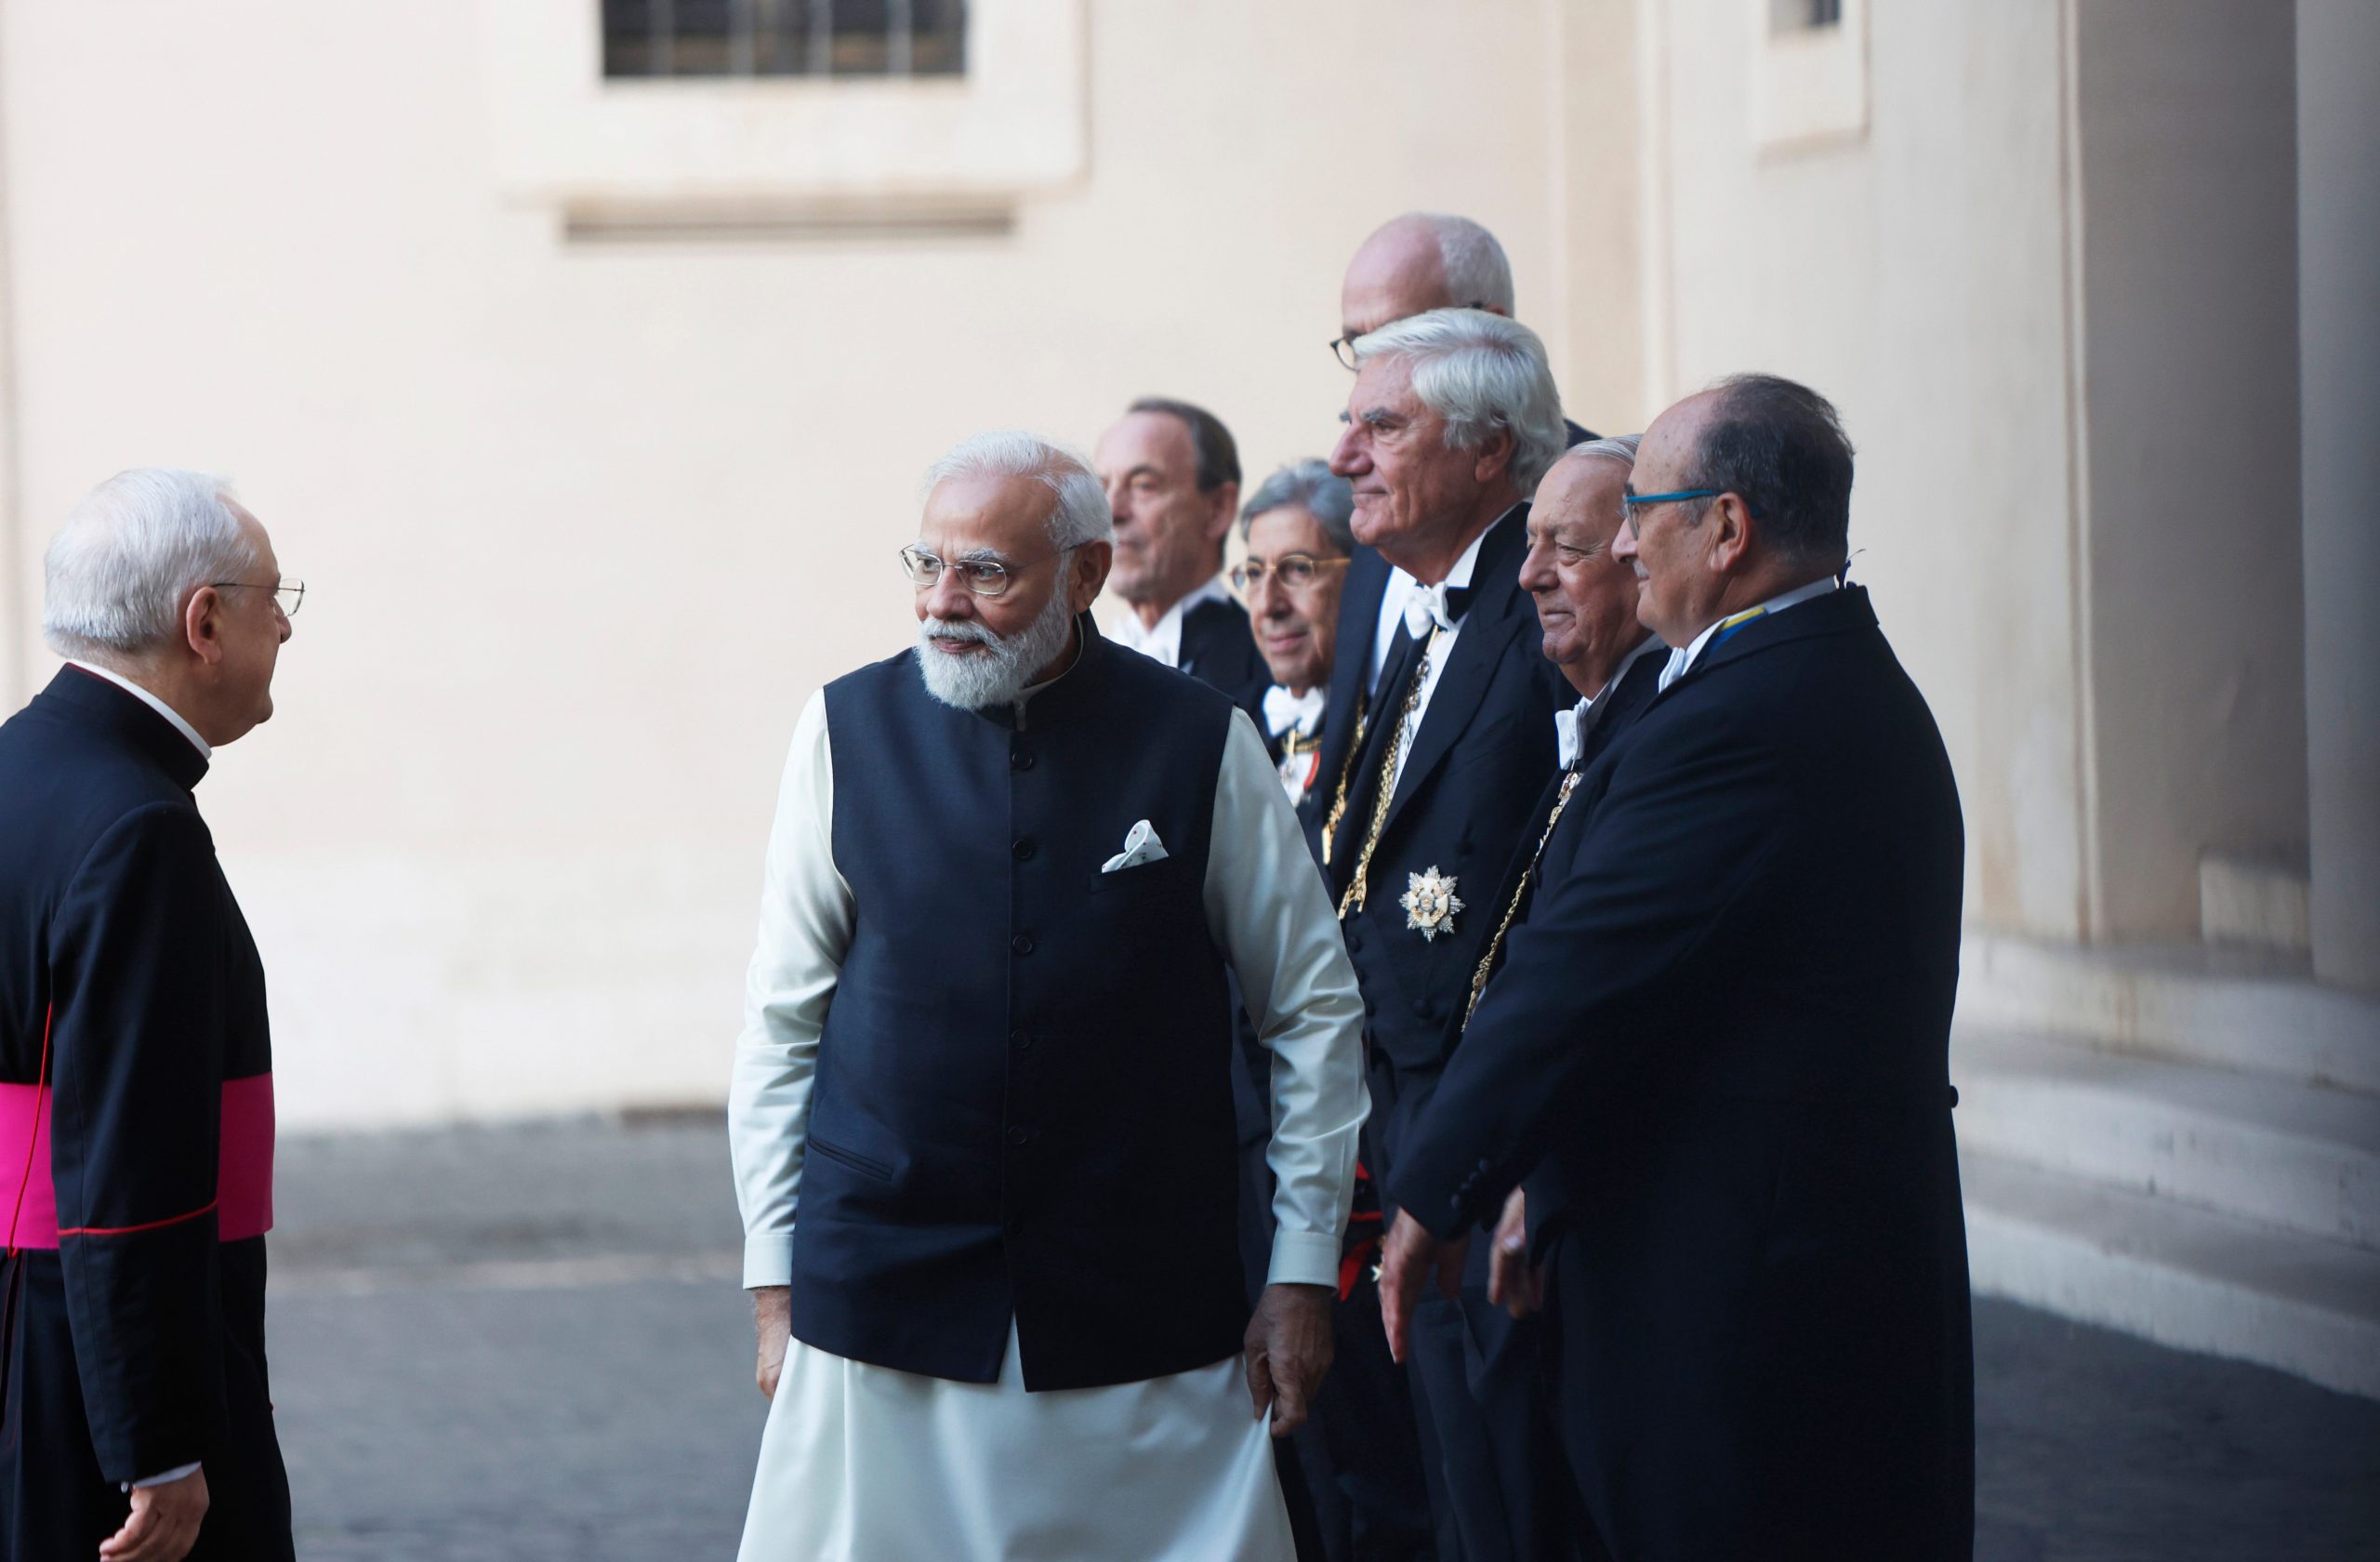 PM Modi meets Pope Francis, talks about wide range of issues